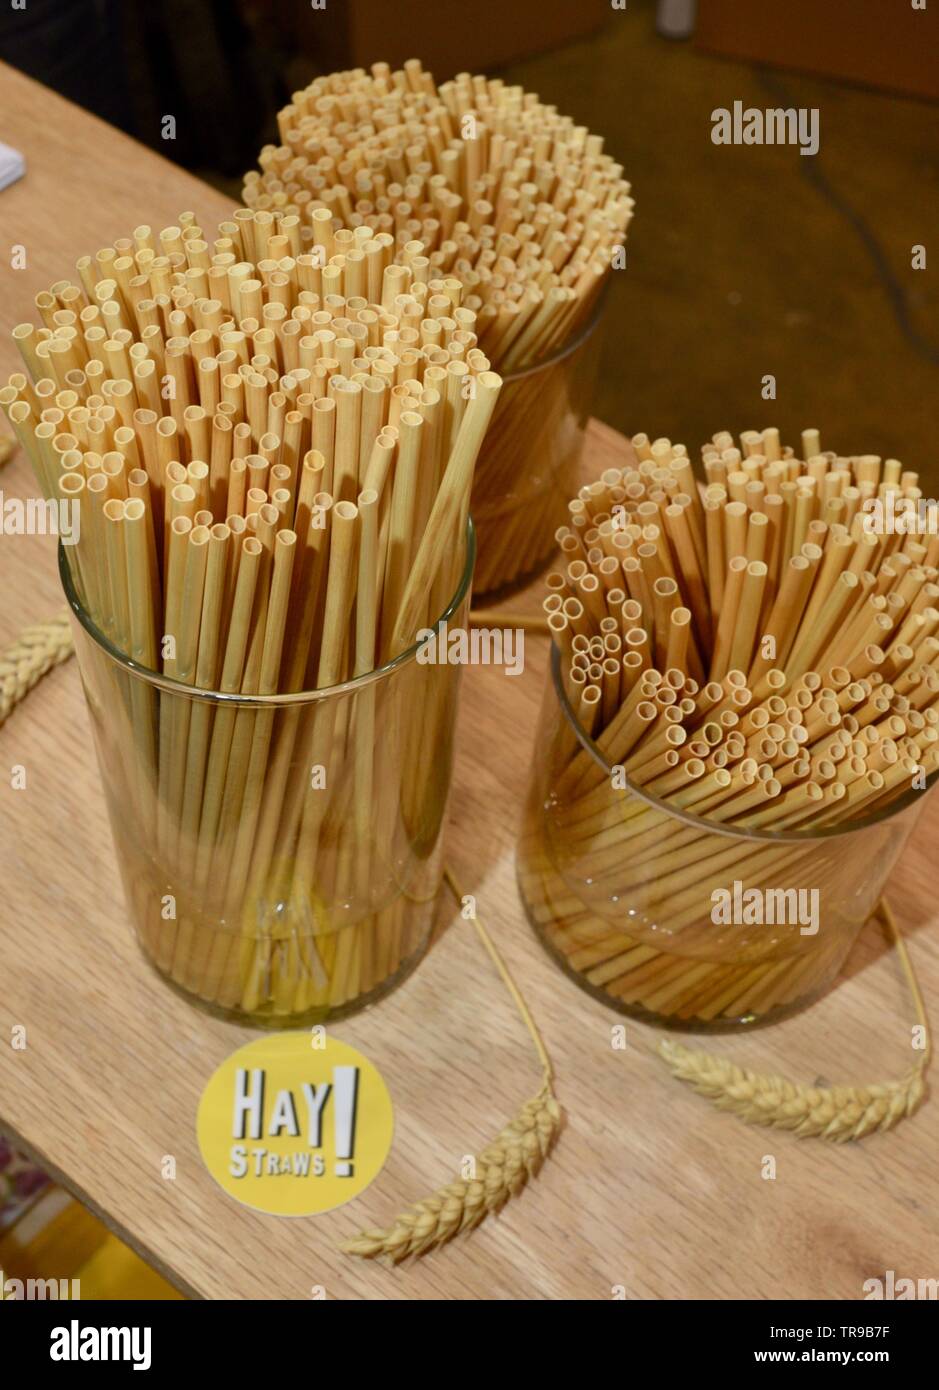 Assorted natural straws made from wheat stalks in jars on display at Hay Straw booth at National Restaurant Association Show held in Chicago, IL, USA Stock Photo